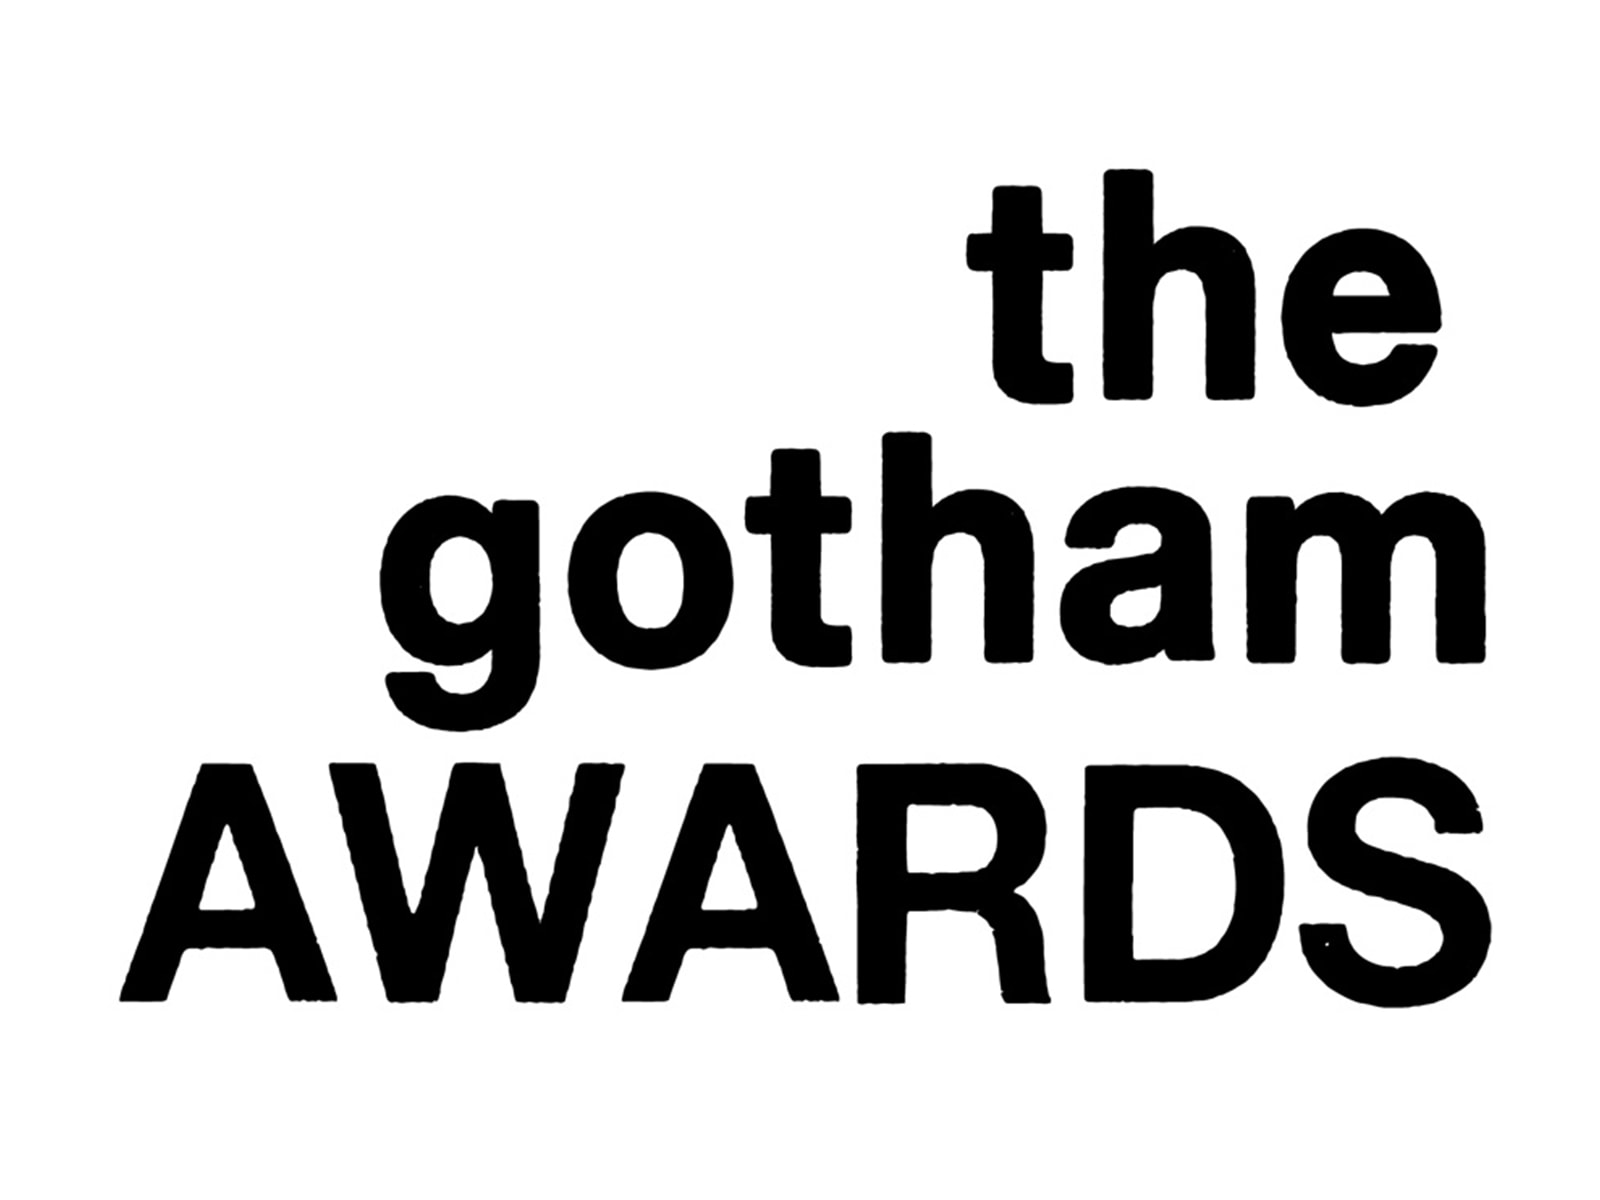 Winners announced for the 31st annual Gotham Awards